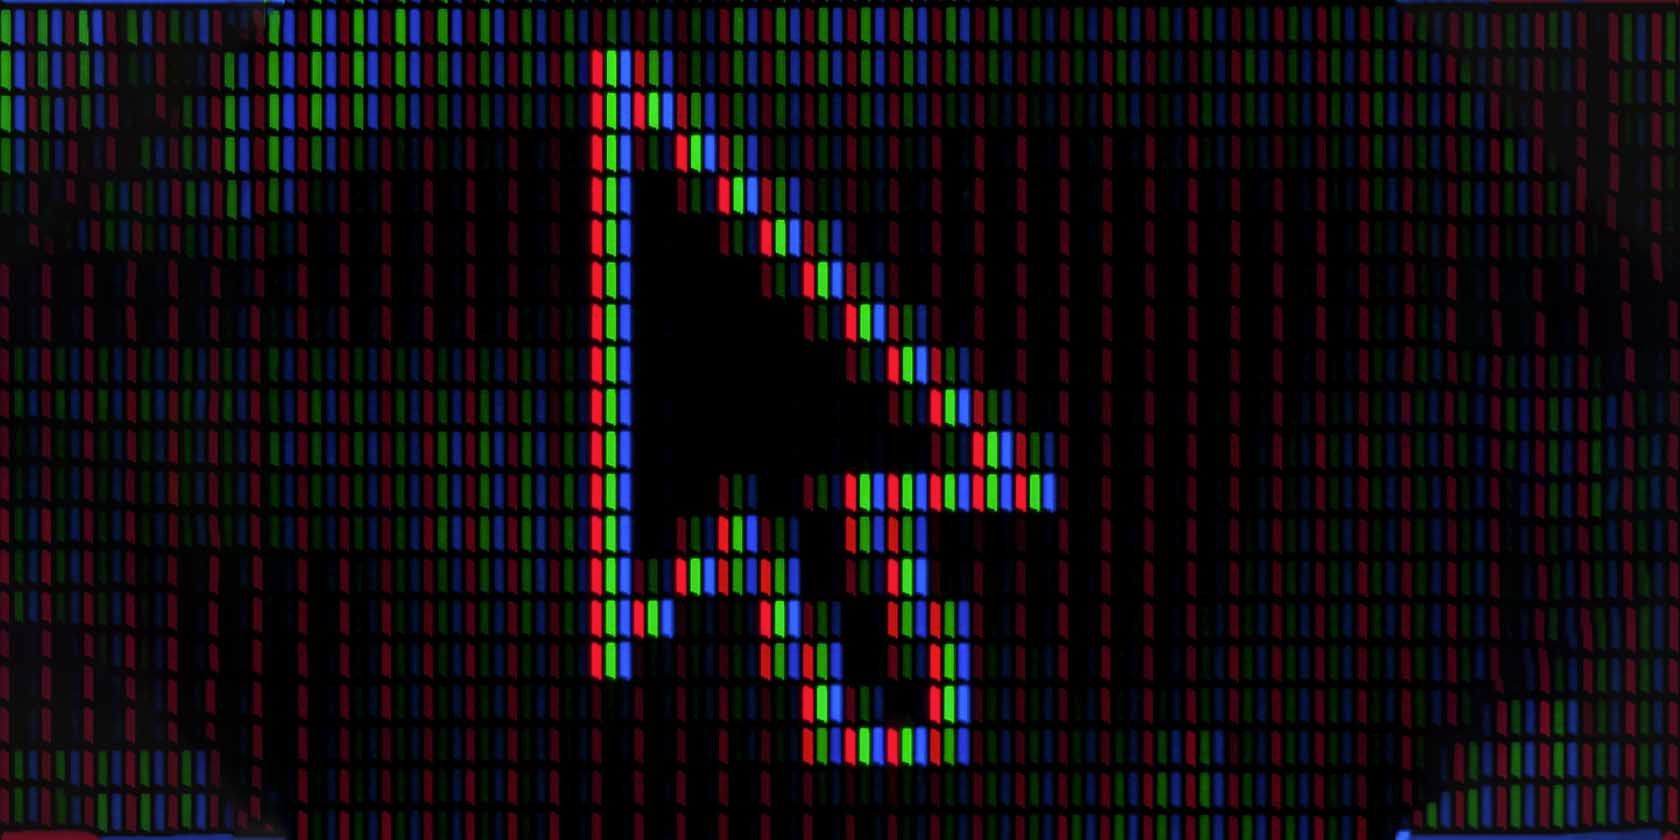 Close up image of a cursor on a screen